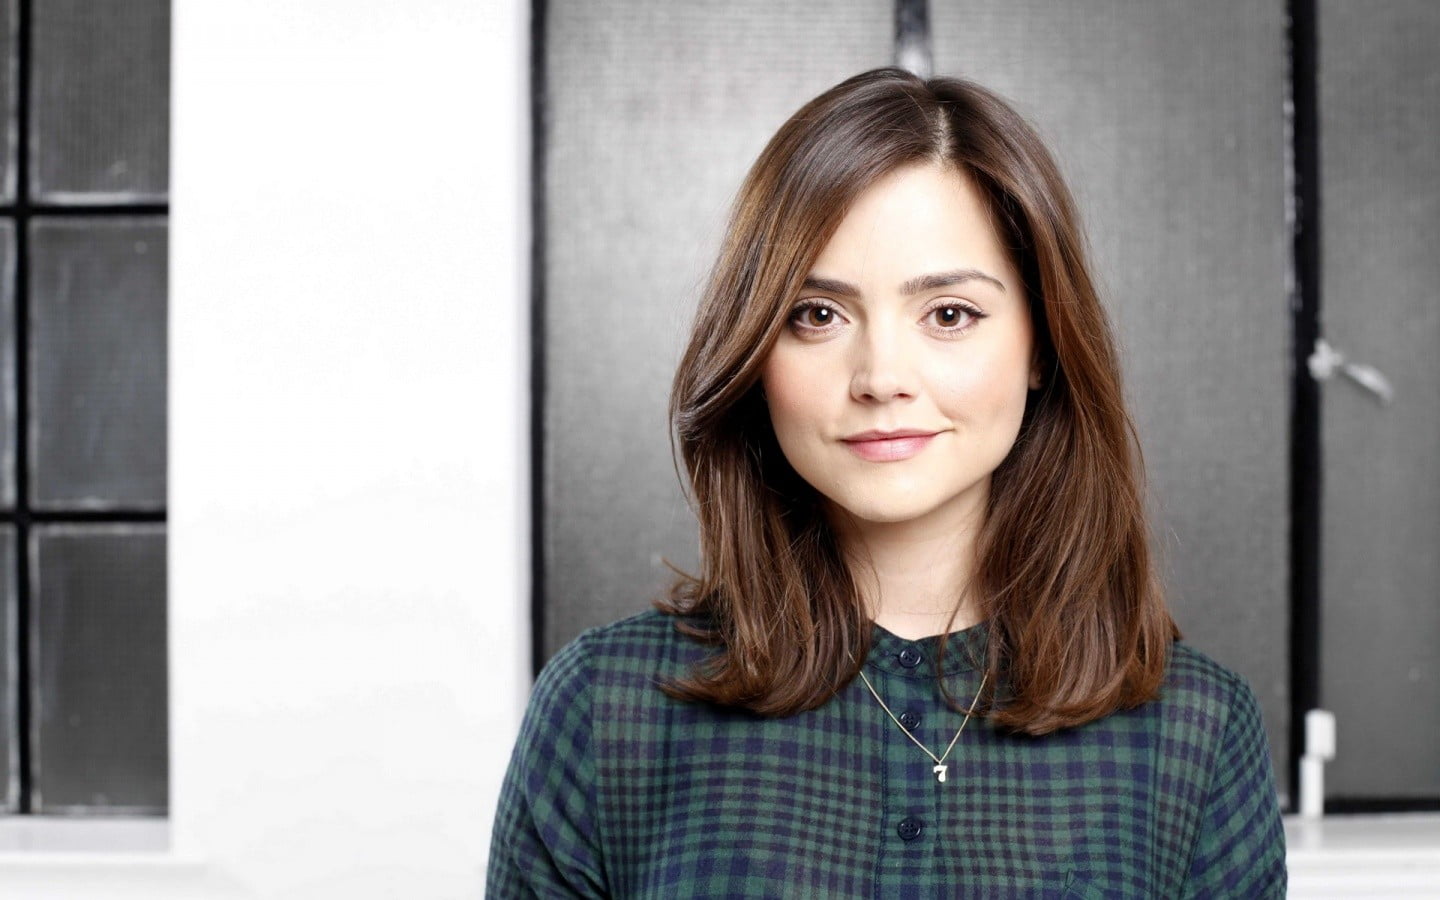 Women's Blue And Green Gingham Top, Doctor Who, Women, - Clara Oswald , HD Wallpaper & Backgrounds